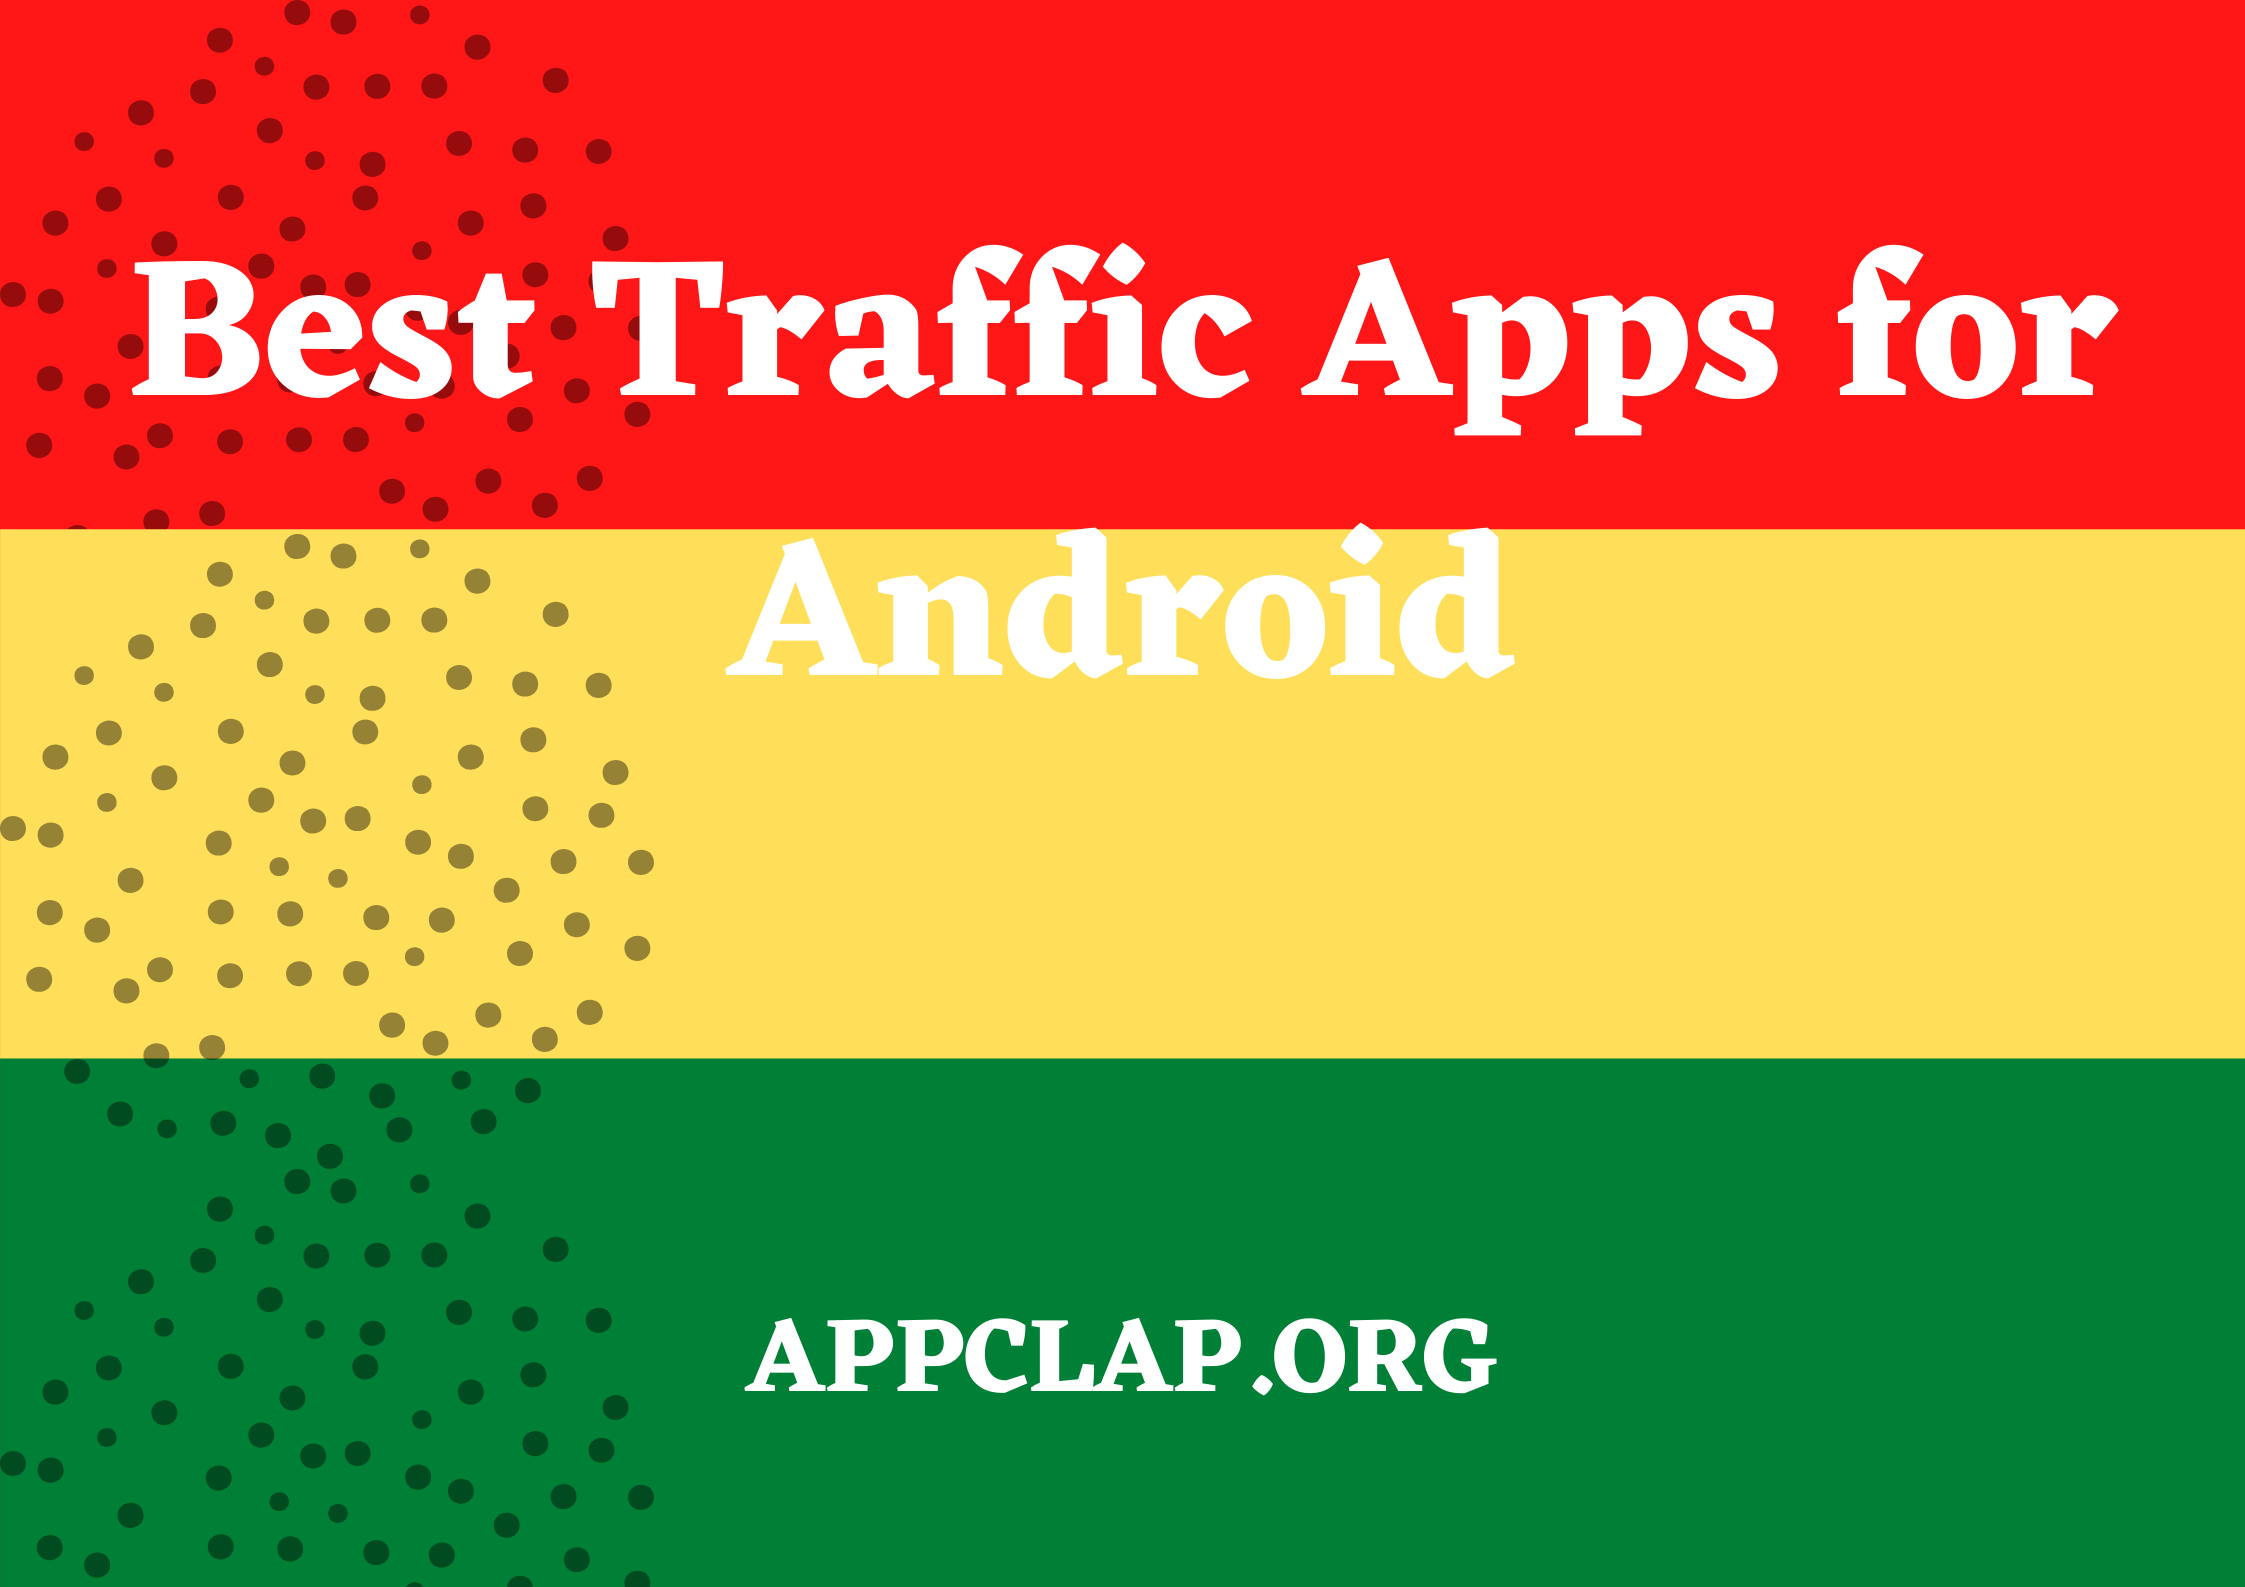 Best Traffic Apps for Android